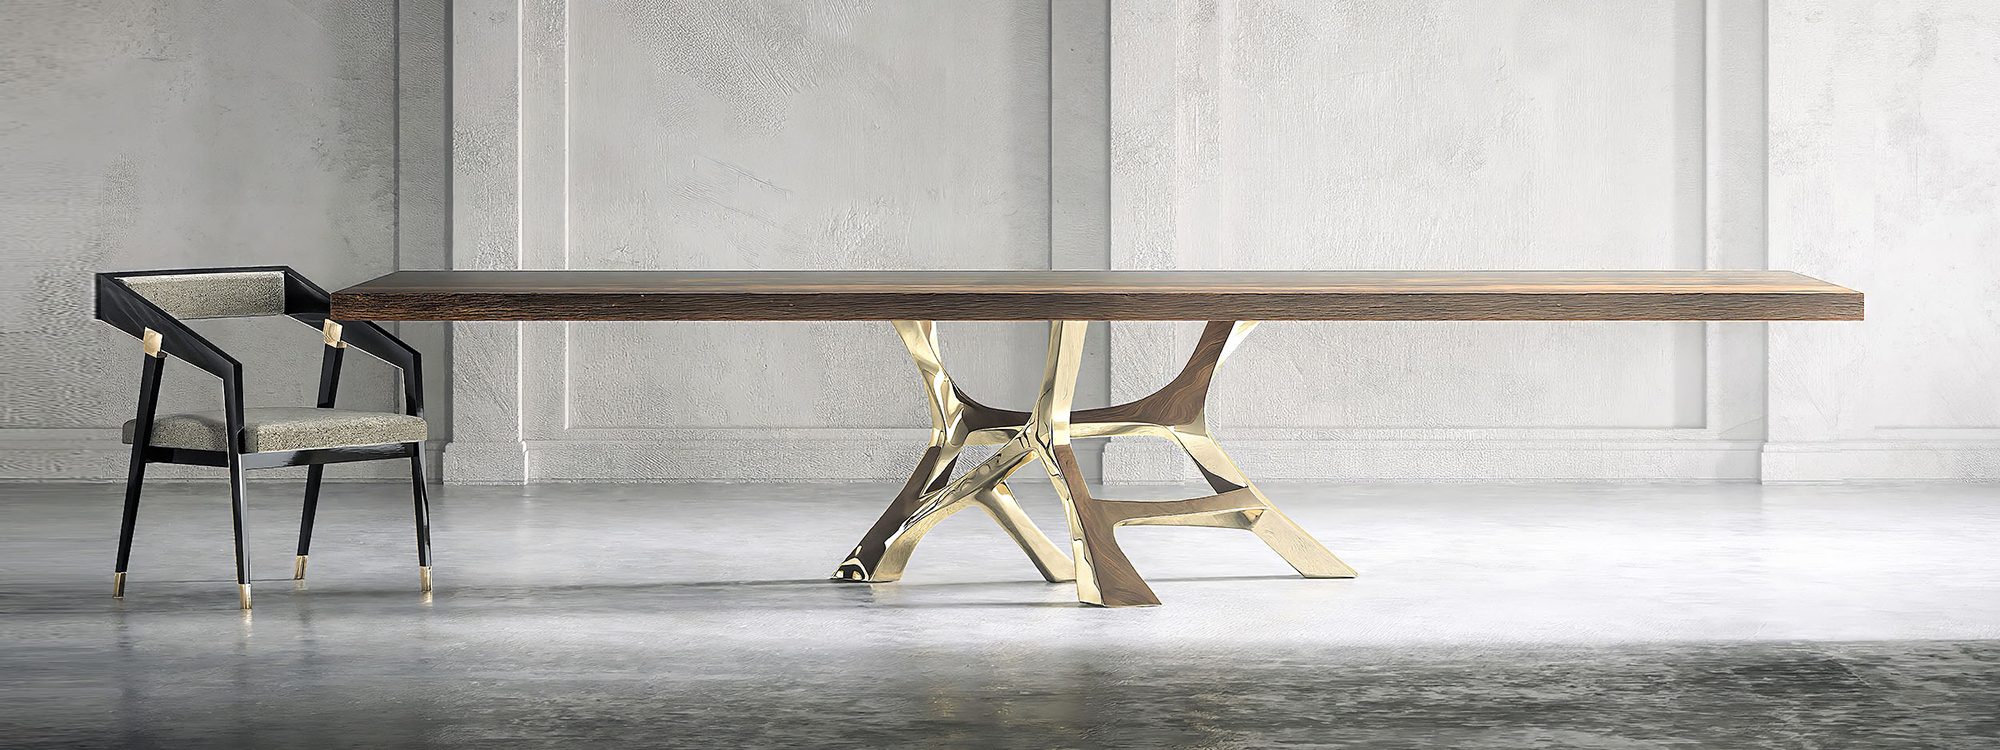 Vena-dining-table-and-Le-loup-chair